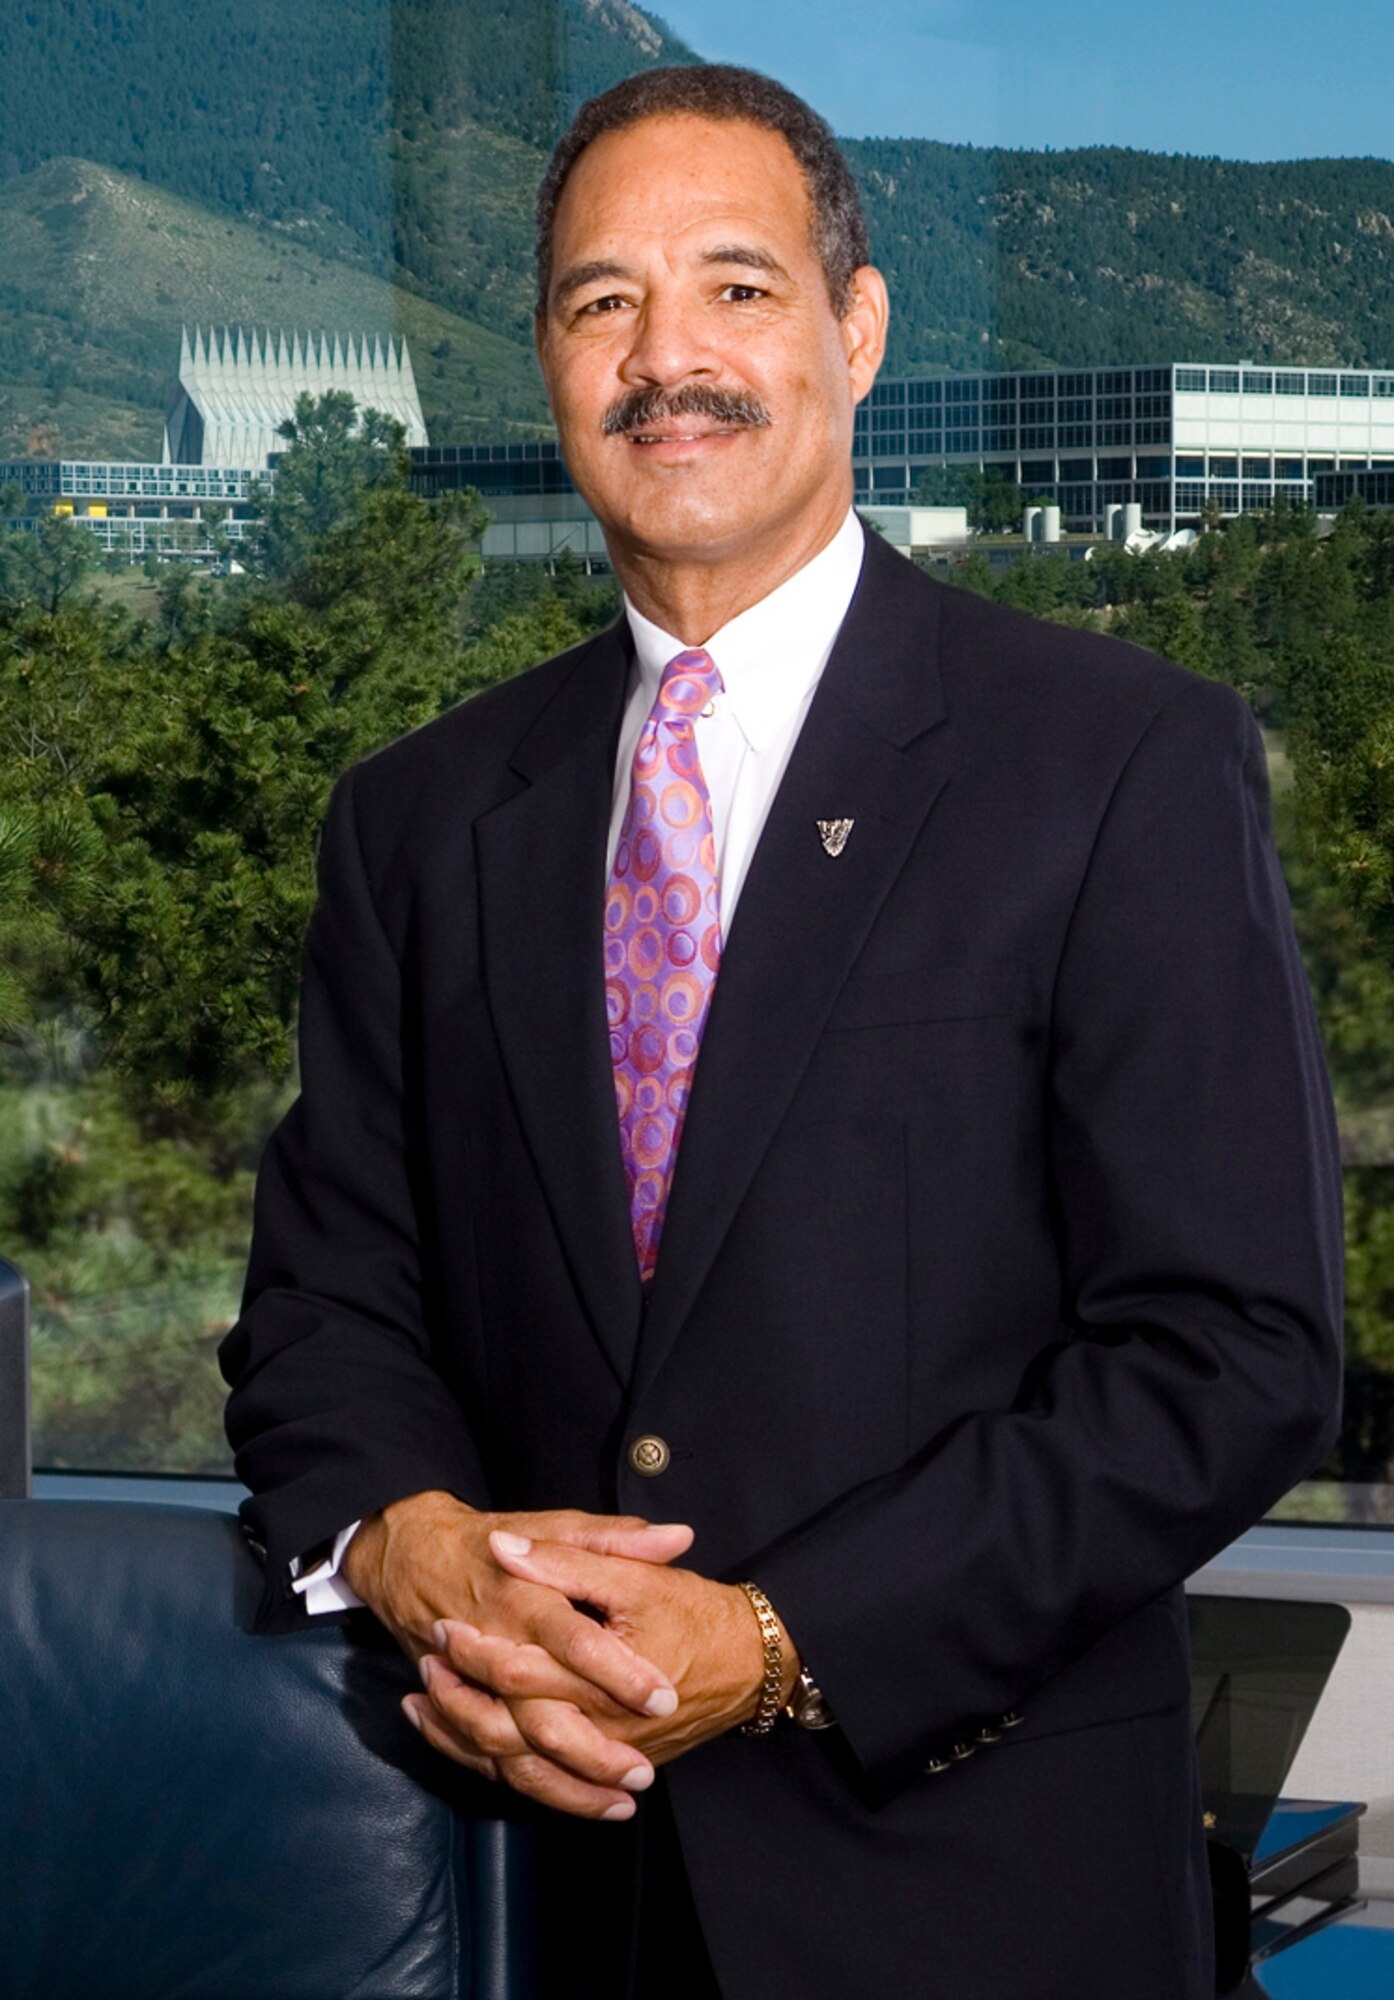 William "T." Thompson is the president and CEO of the Association of Graduates; a non-profit organization that supports the Air Force Academy and its alumni. (U.S. Air Force photo)